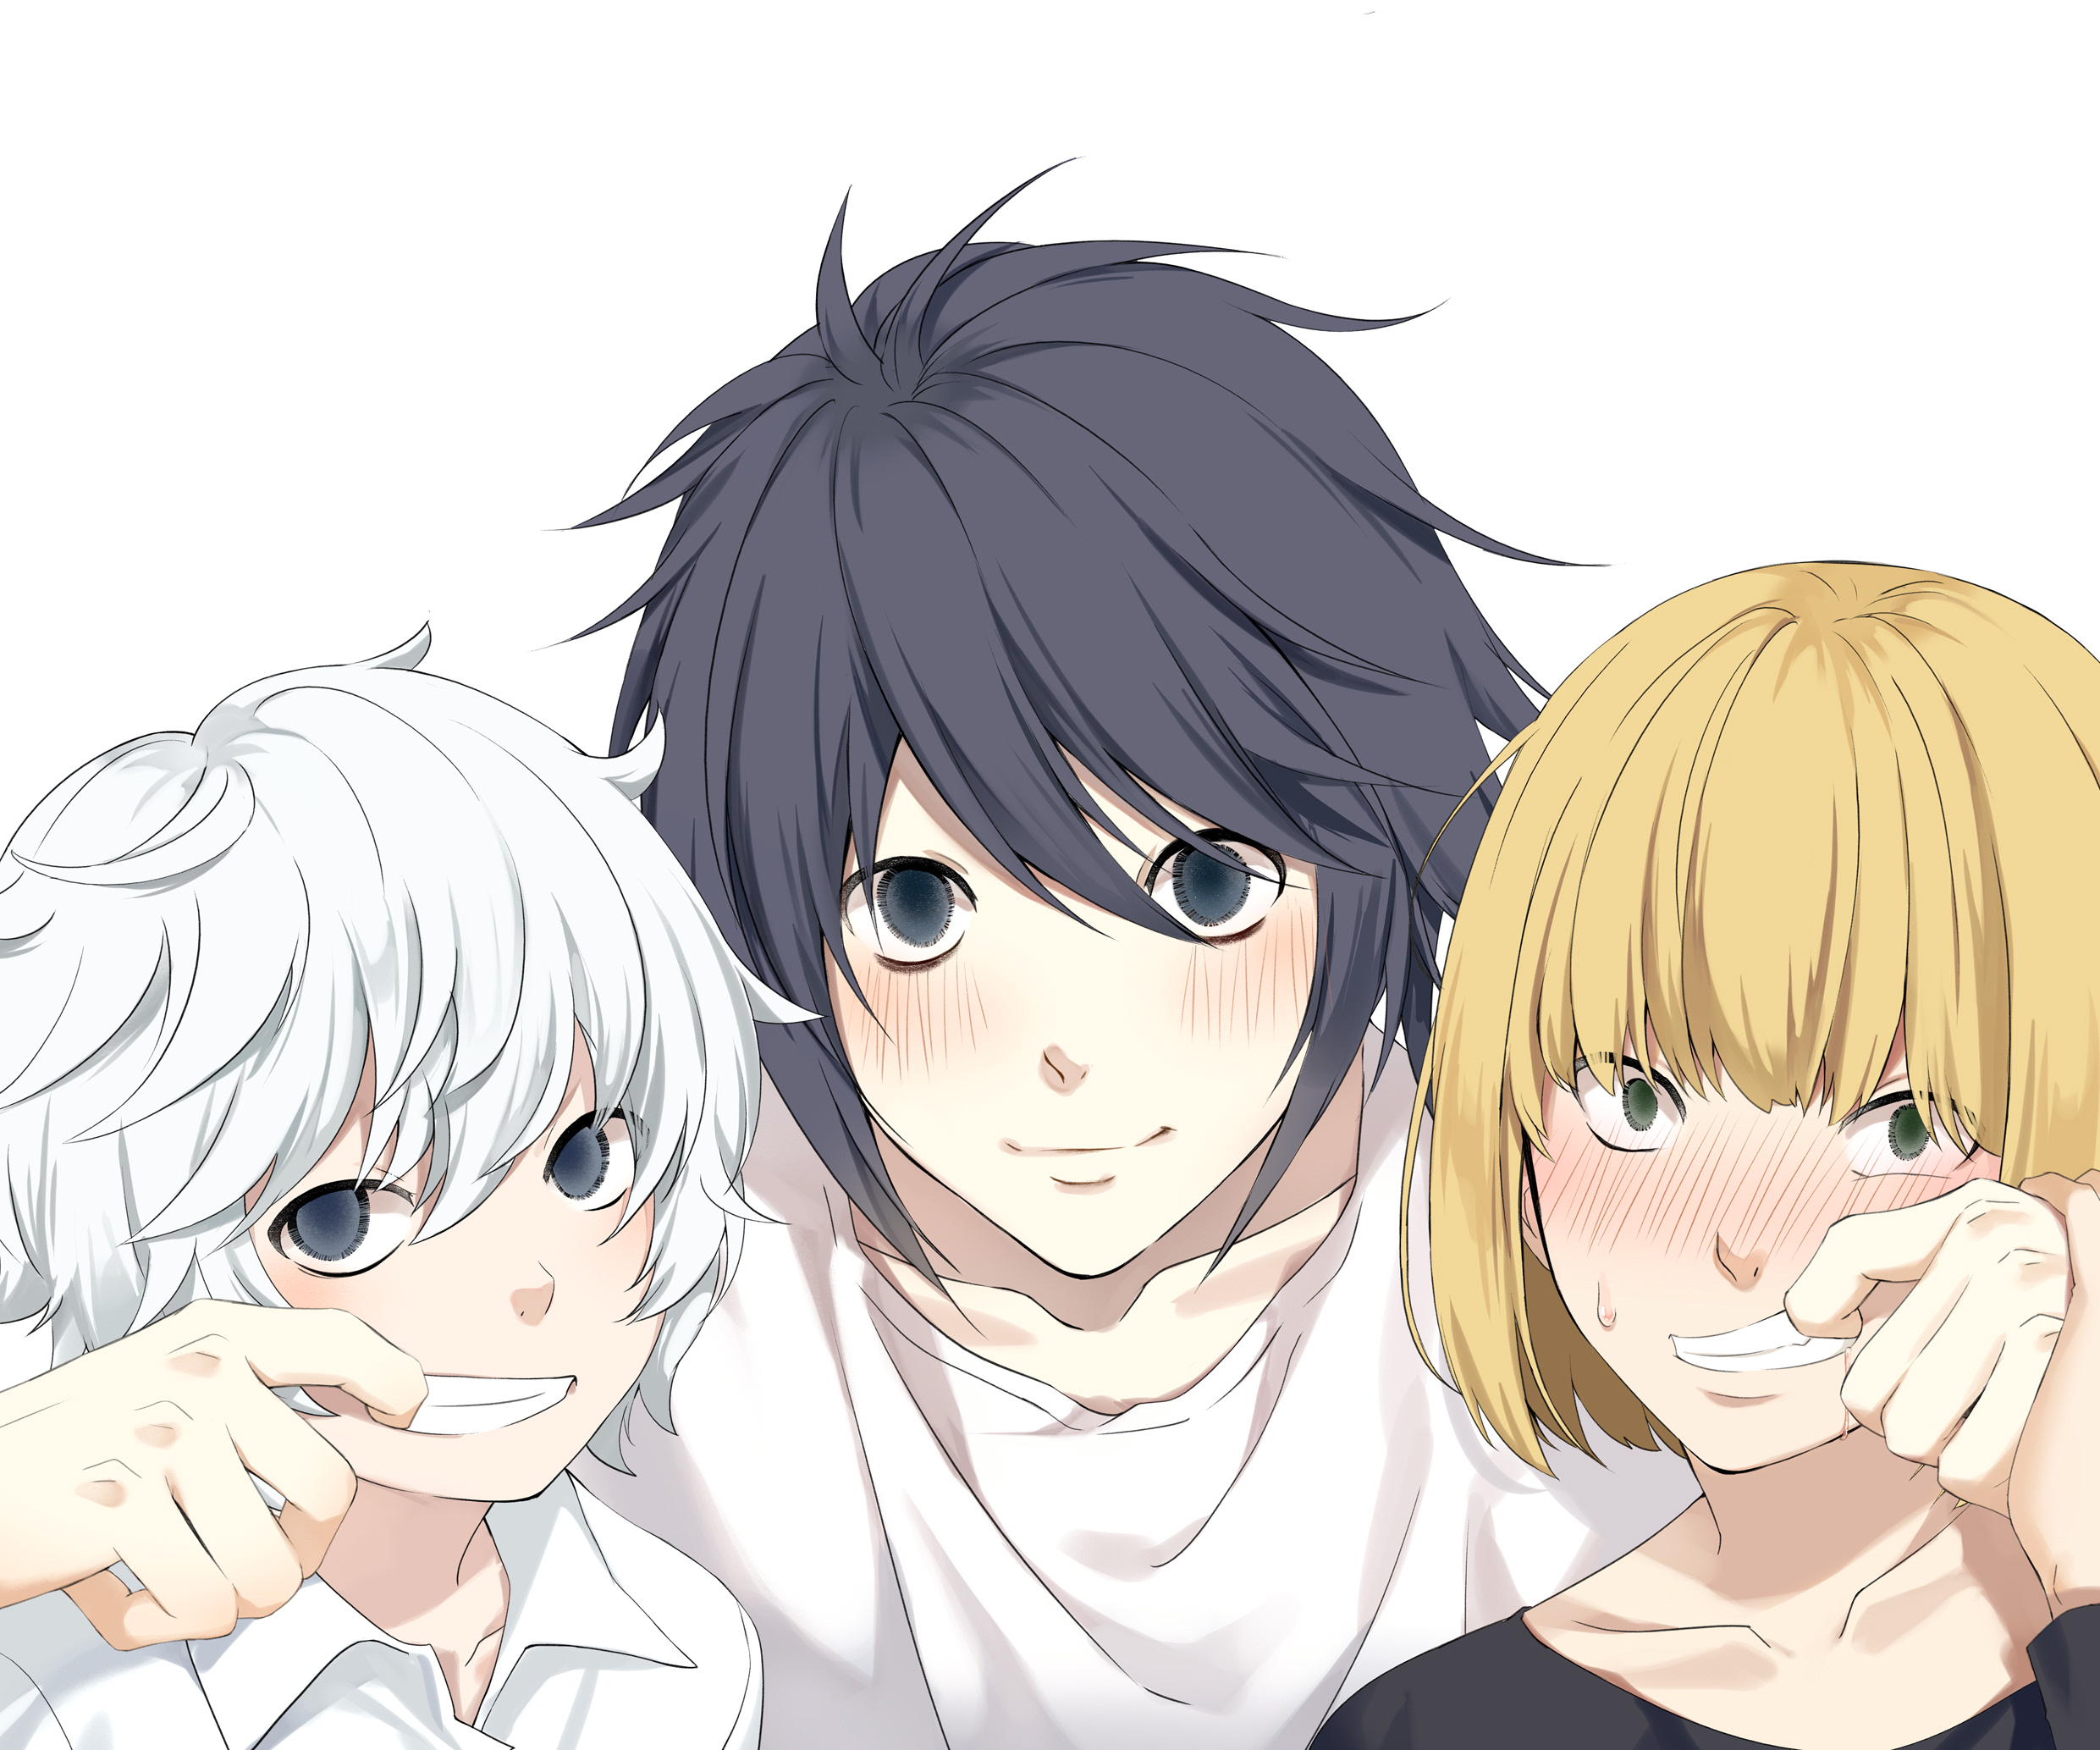 l (death note), near (death note), mello (death note), anime, death note